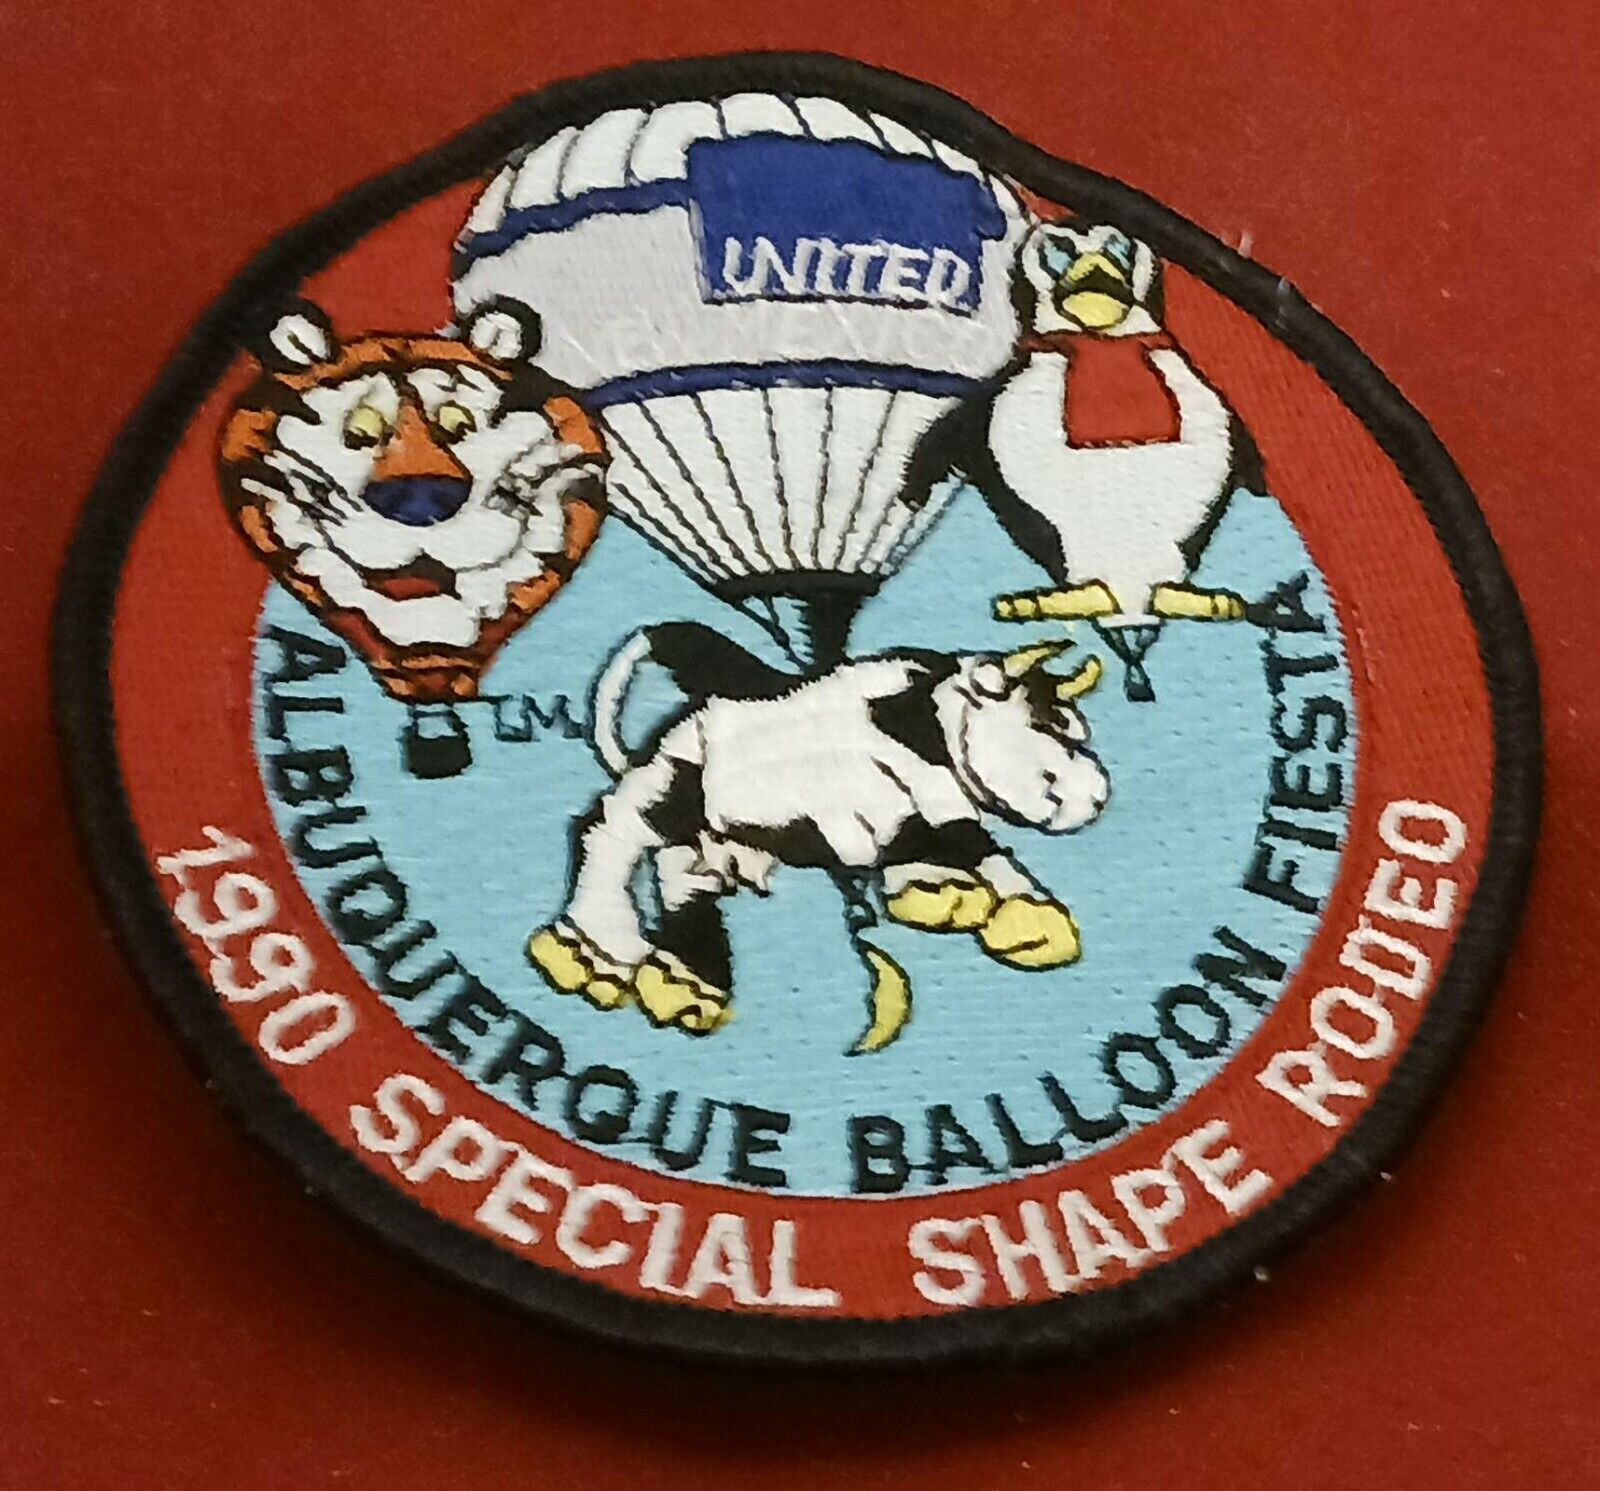 1990 Special Shape Rodeo Albuquerque Balloon Fiesta United Nm Balloon Patch